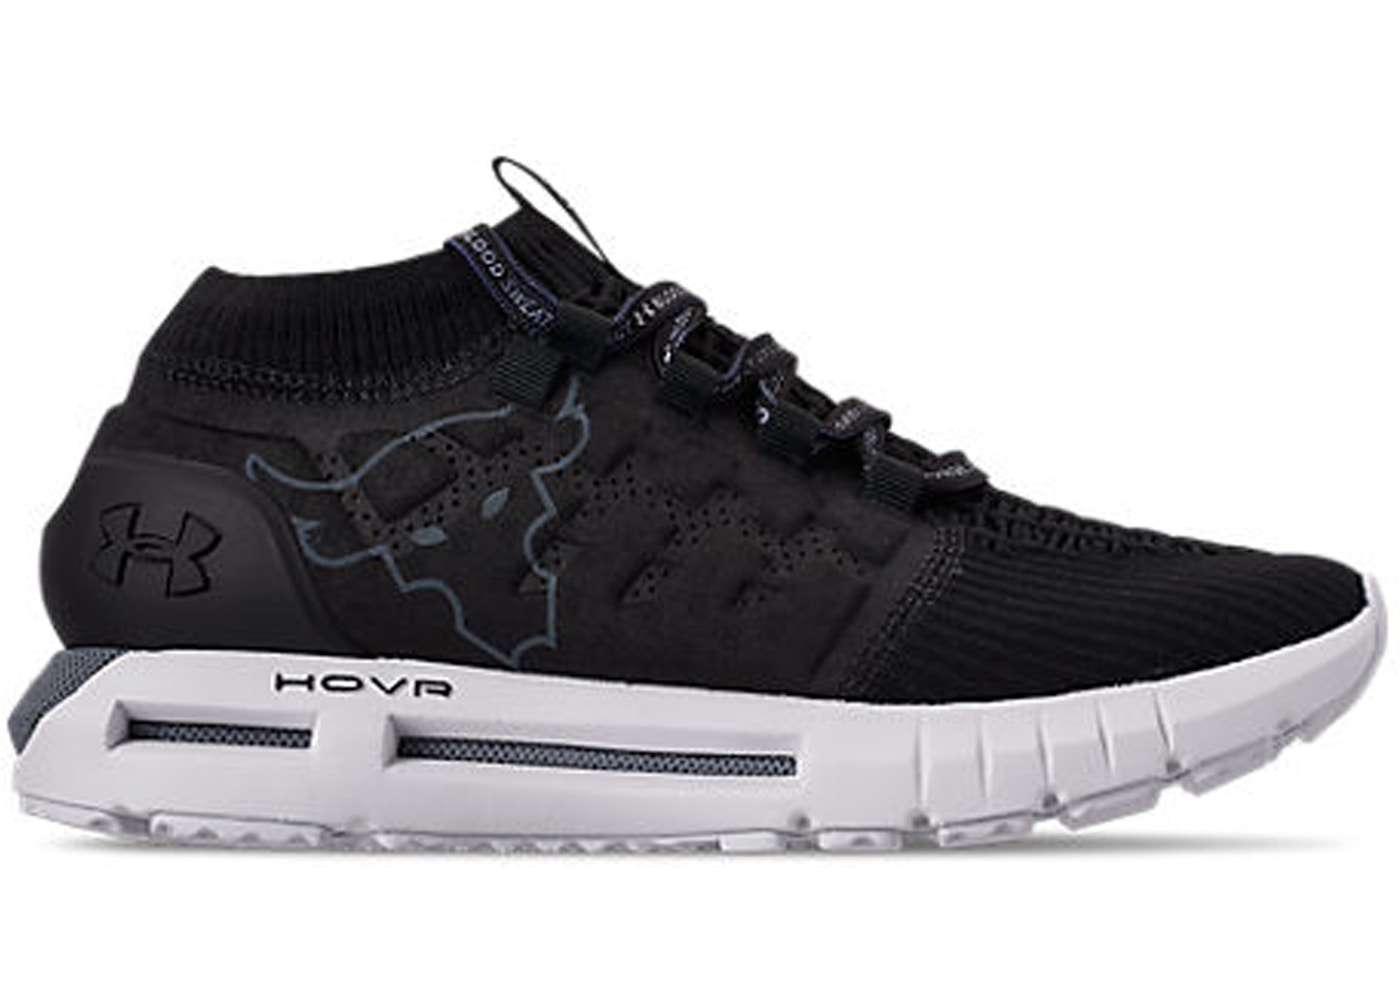 Project Rock x Under Armour HOVR 